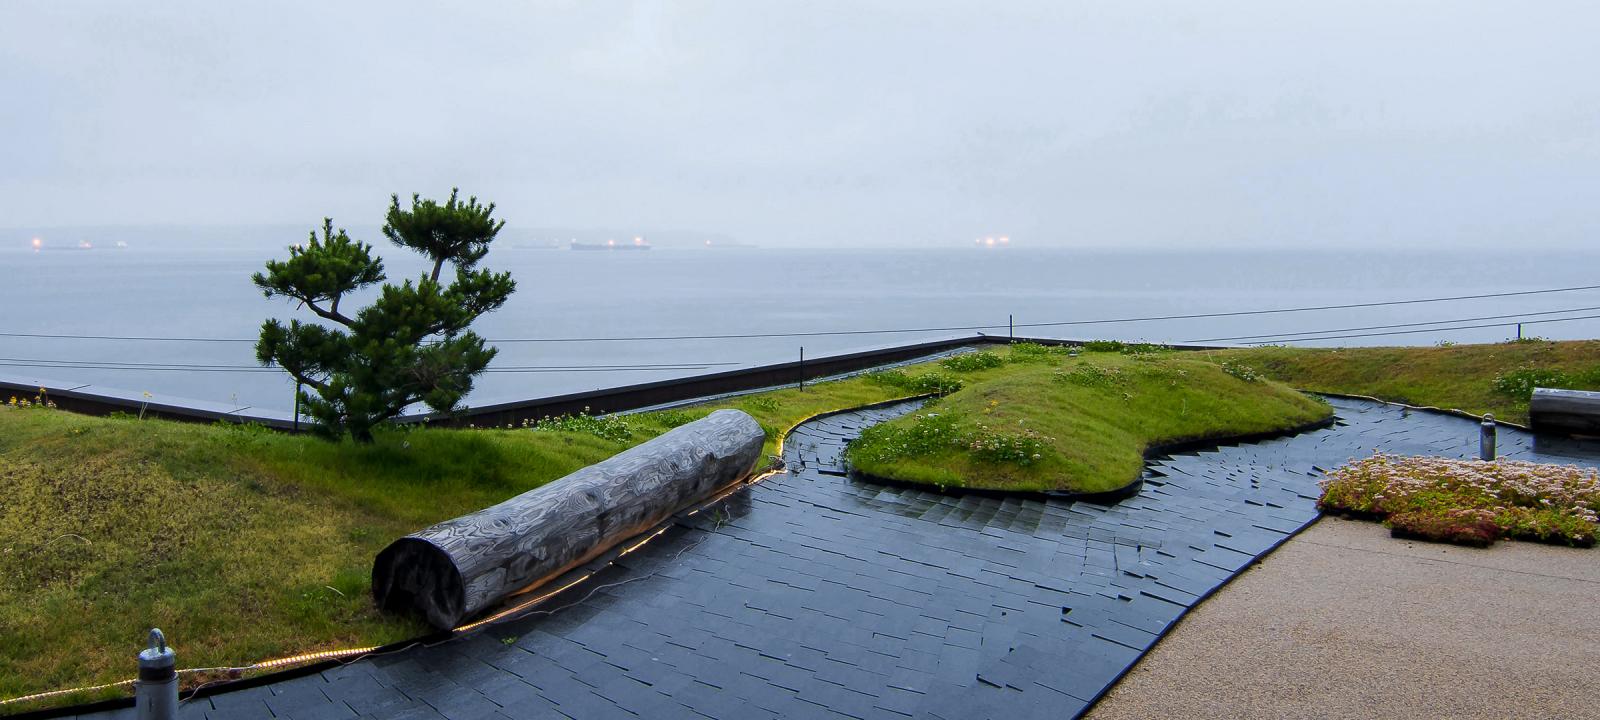 Roof garden with lawn, tree trunk, small pine tree and subtle illumination at dawn